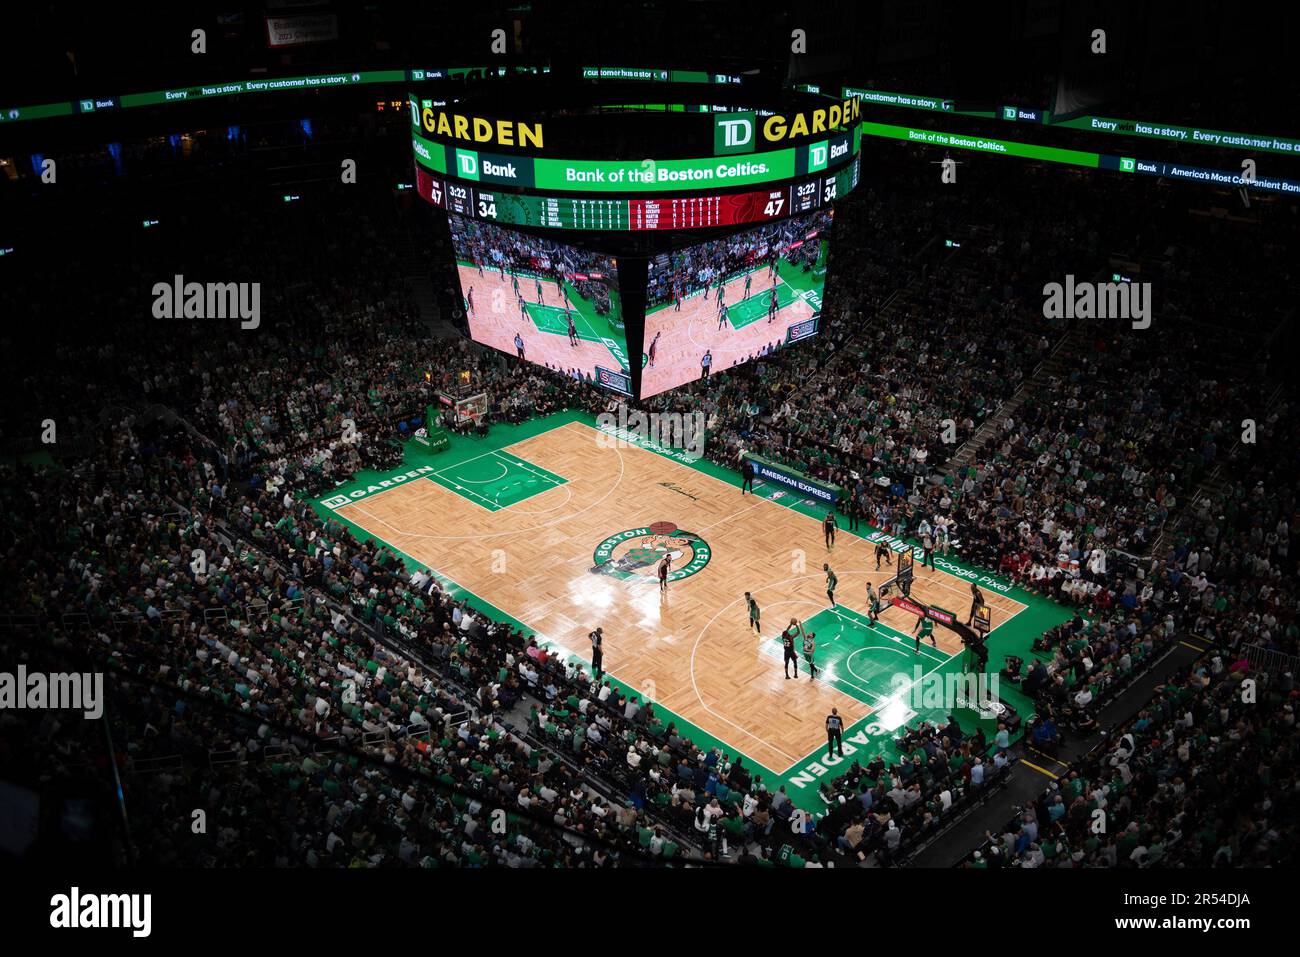 TD GARDEN ANNOUNCES NEW PLAYOFF ACTIVATIONS FOR EASTERN CONFERENCE